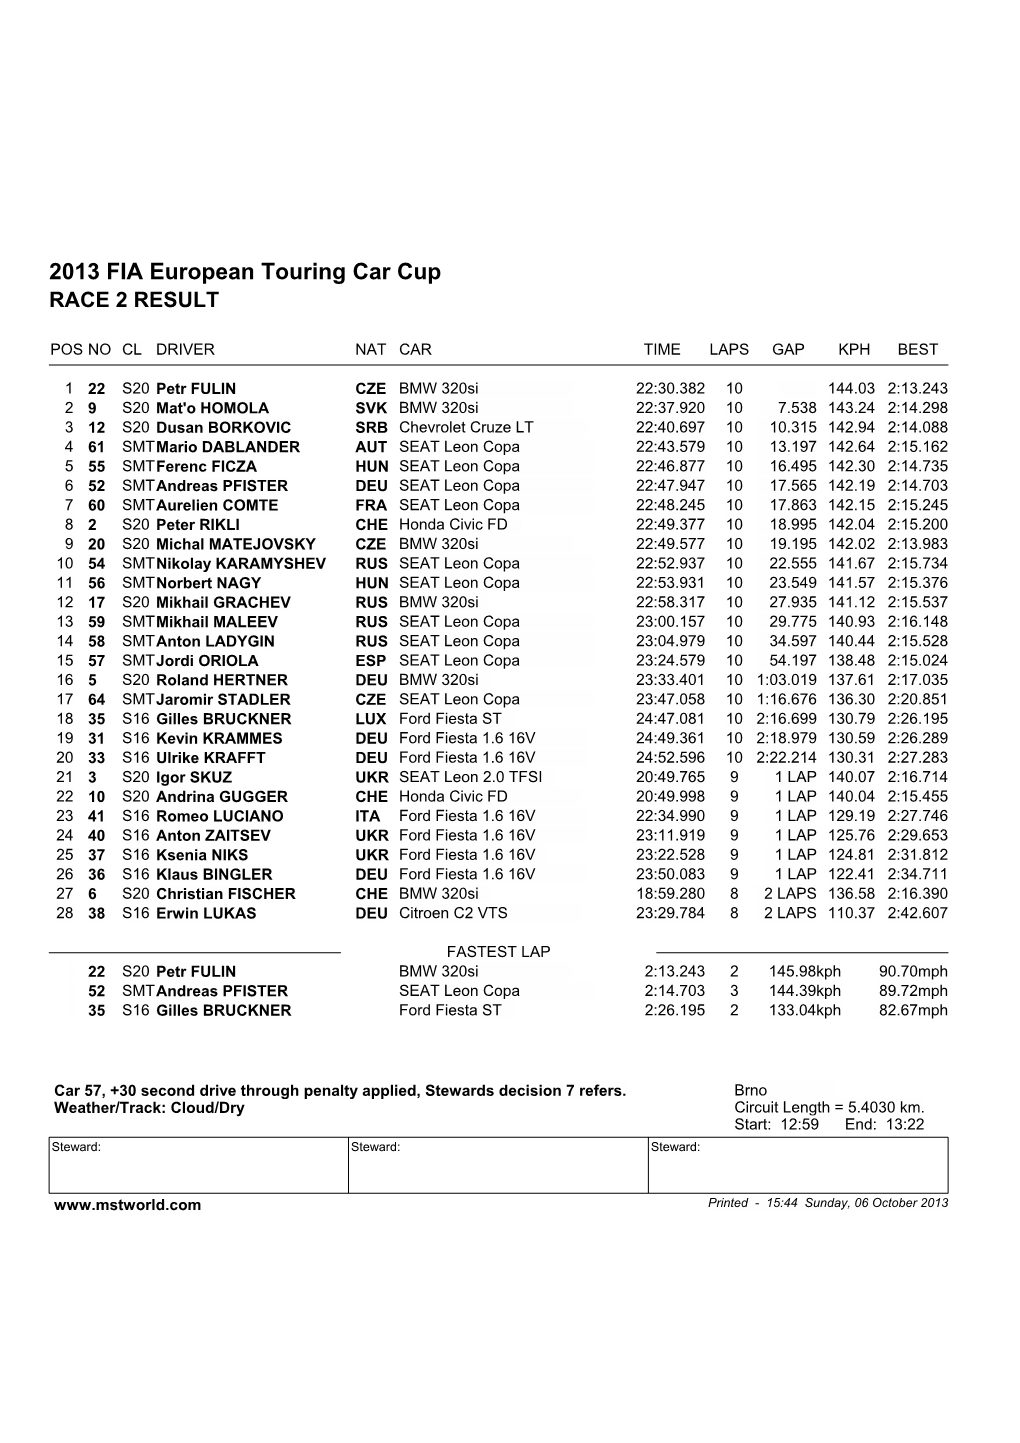 2013 FIA European Touring Car Cup RACE 2 RESULT